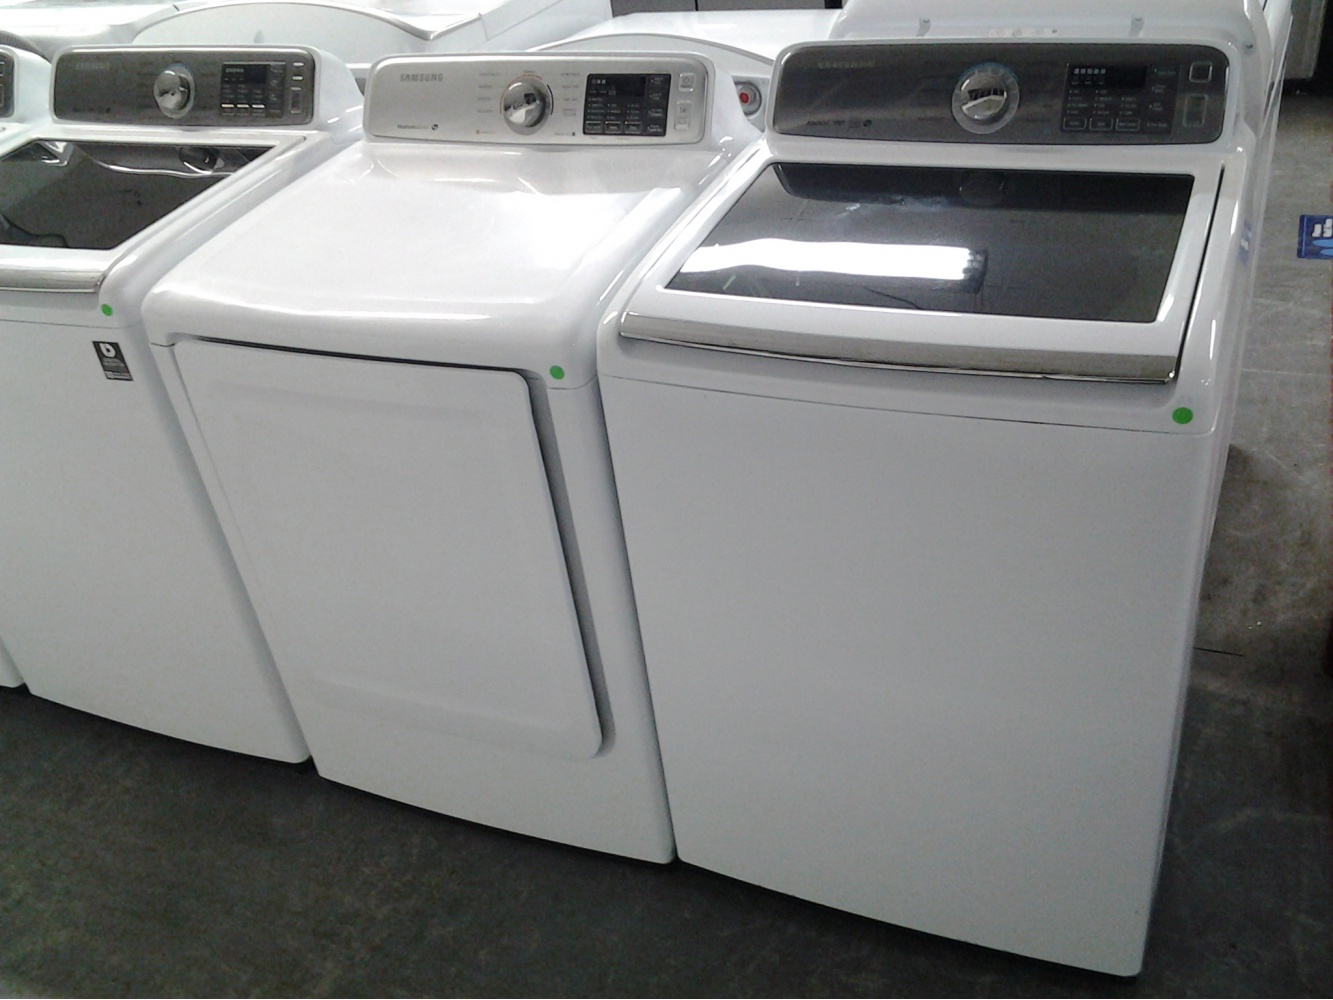 SAMSUNG WHITE 27" TOP LOAD HE WASHER/GAS DRYER SET ***OUT OF STOCK*** Kimo's Appliances Van Nuys